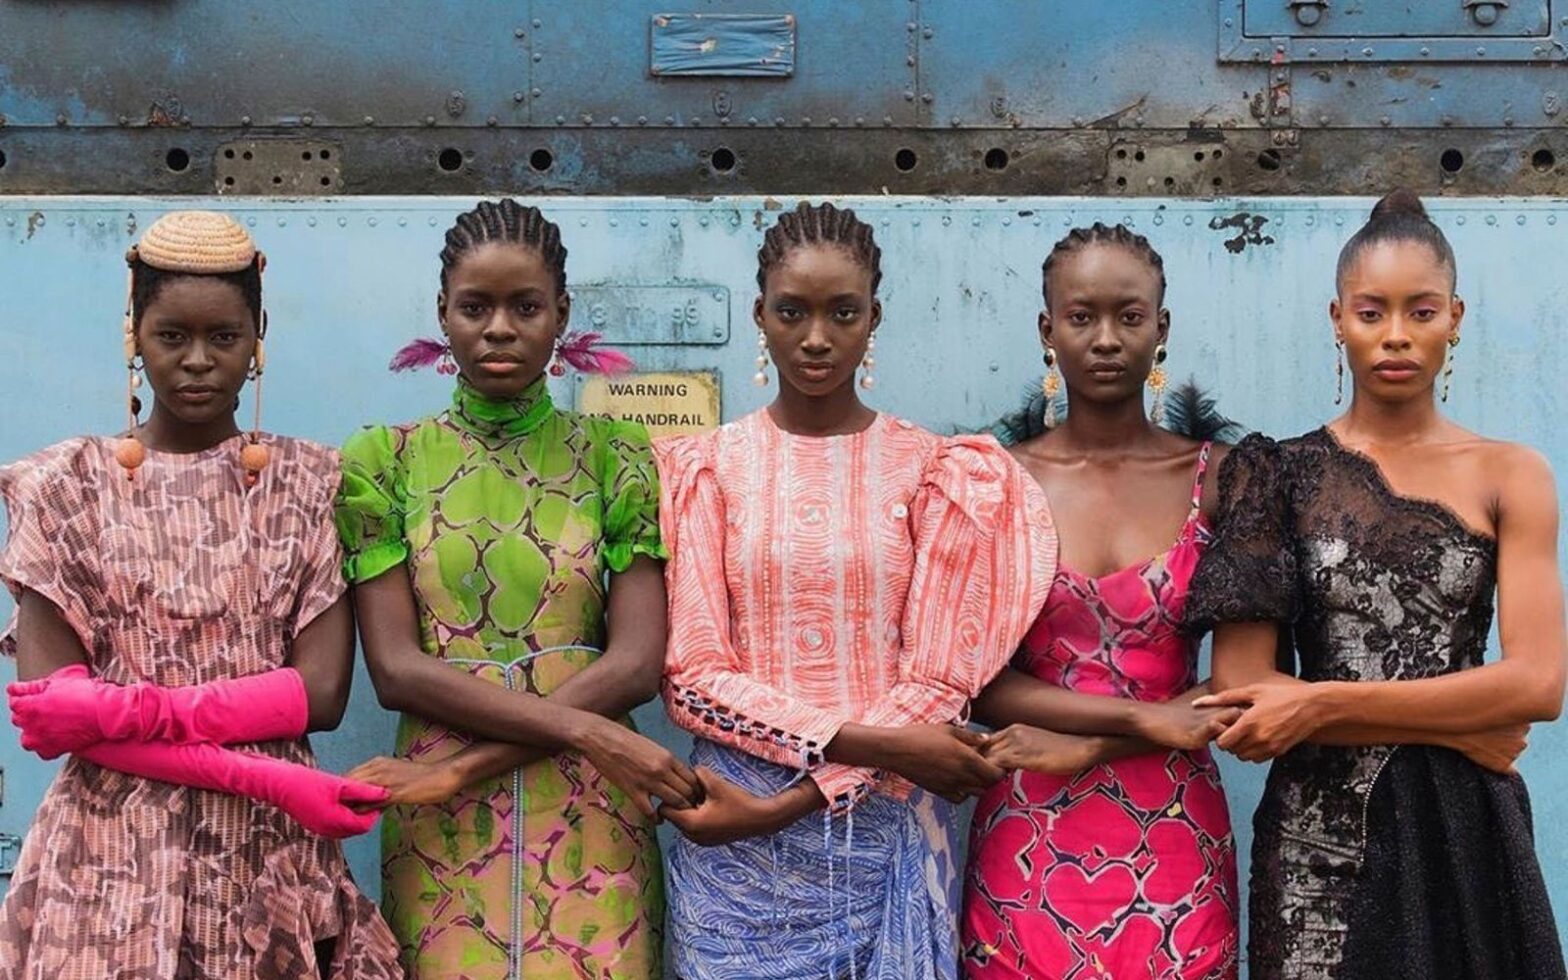 NYC Holds Exhibition Highlighting Modern African Fashion